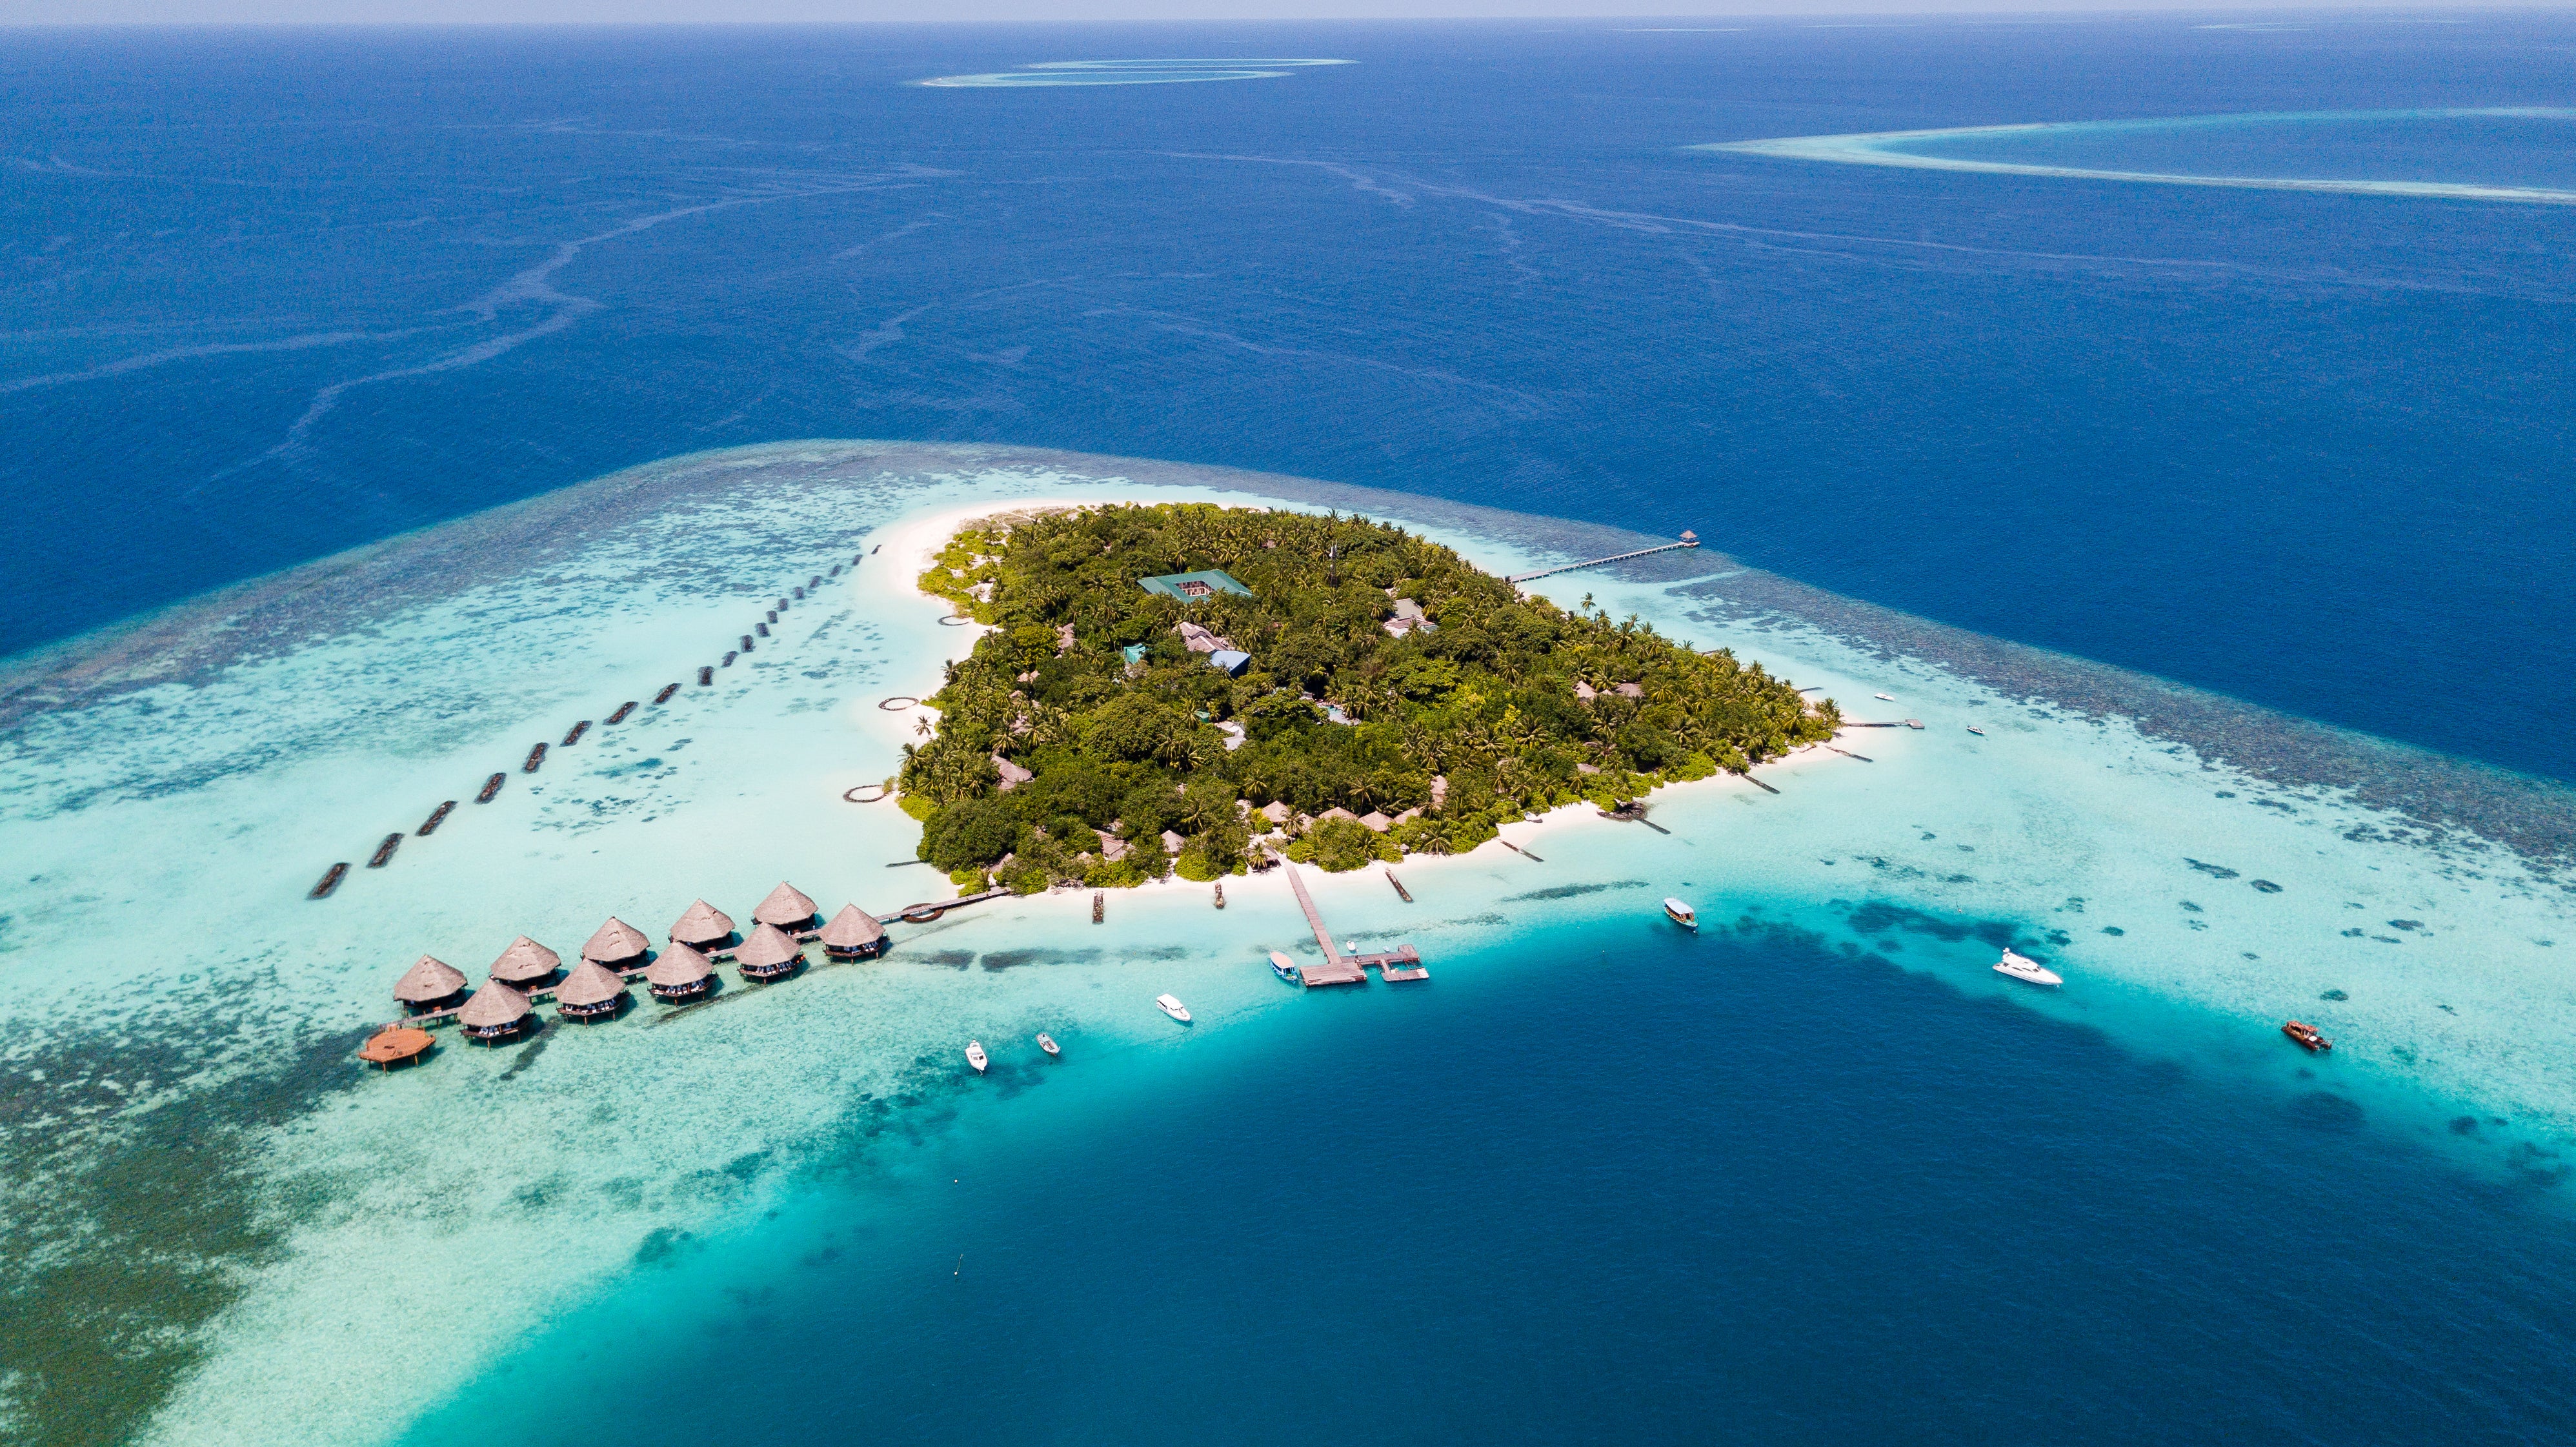 Maldives islands have fine-sand beaches and warm water for swimming